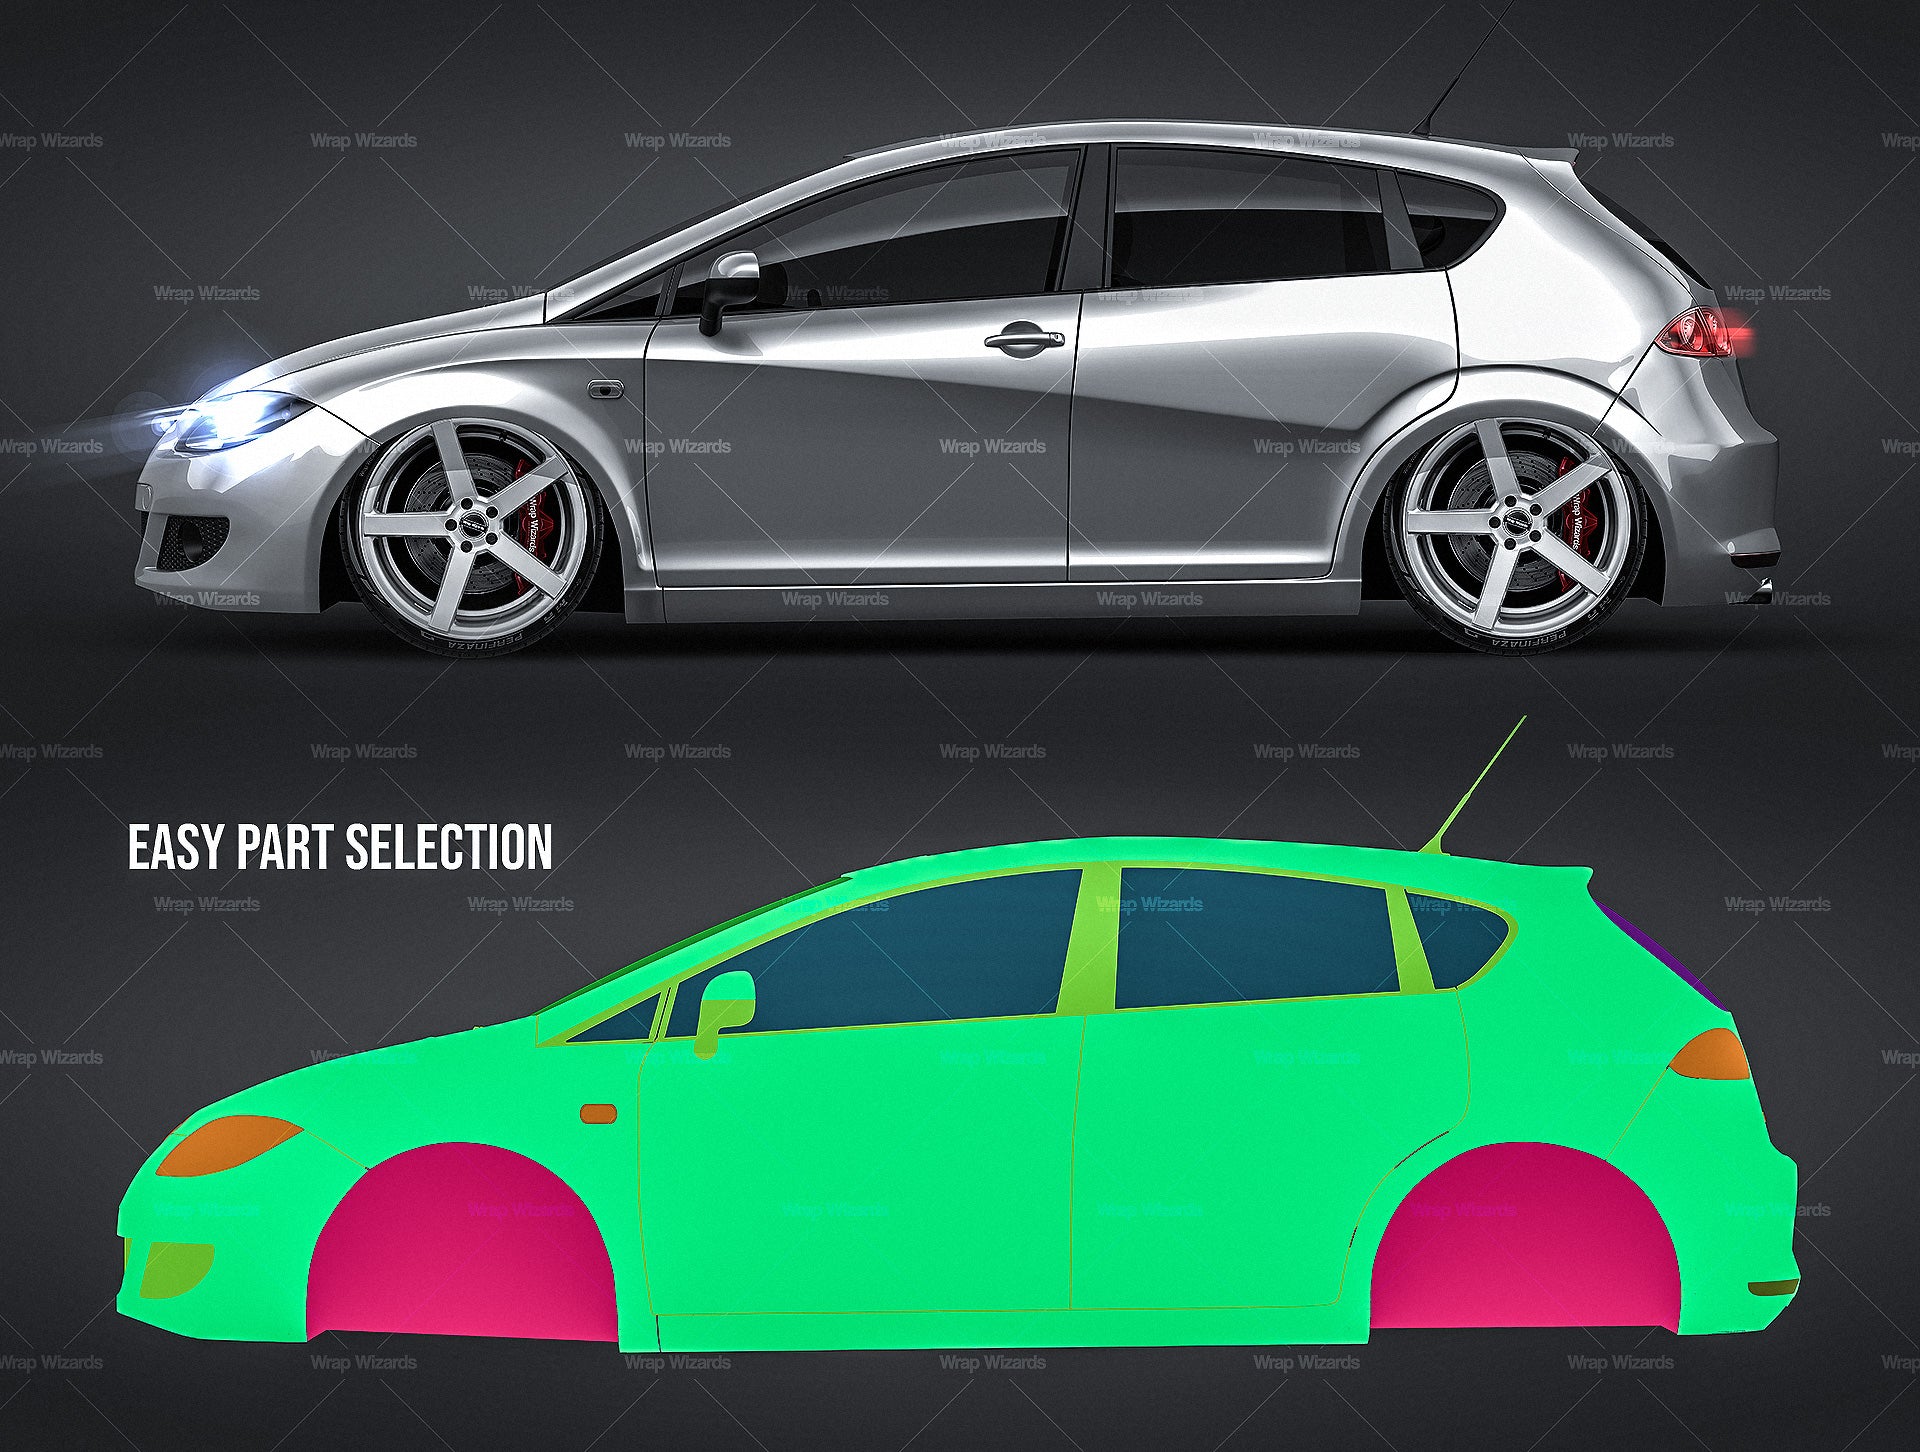 Seat Leon 2006 glossy finish - all sides Car Mockup Template.psd